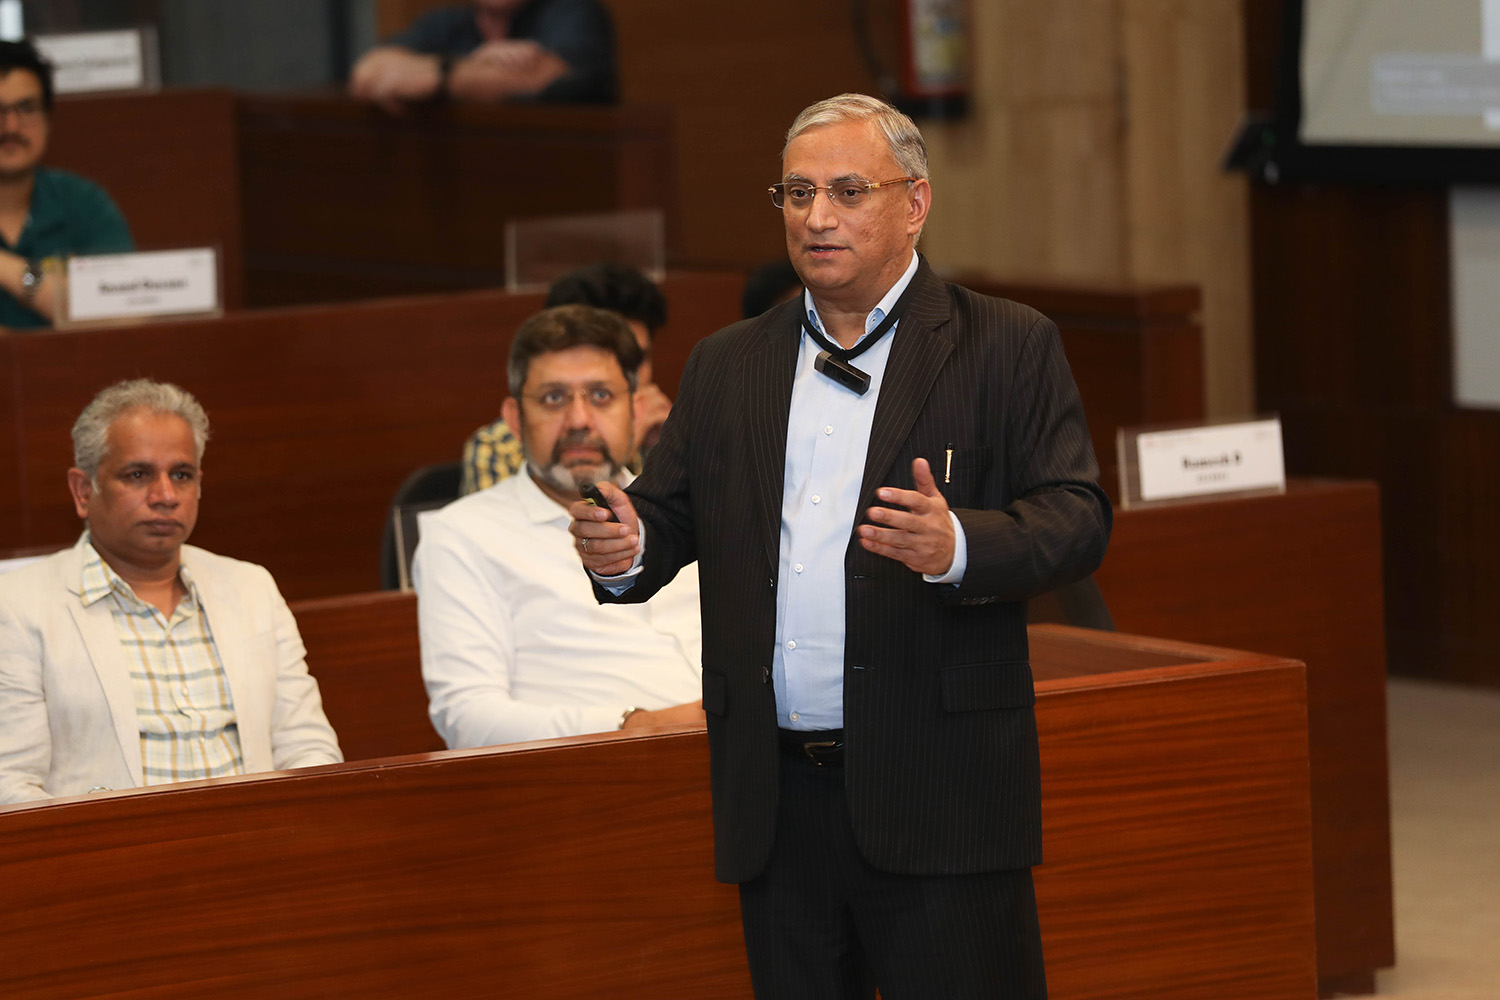 Arvind Mediratta, MD & CEO, METRO Cash & Carry India Pvt. Ltd., addresses IIM Bangalore students on Developing Leadership Traits & during a session organized by the Executive Post Graduate Programme in Management (EPGP) Seminar Committee as part of its Seminar Series, on 2nd May 2023.